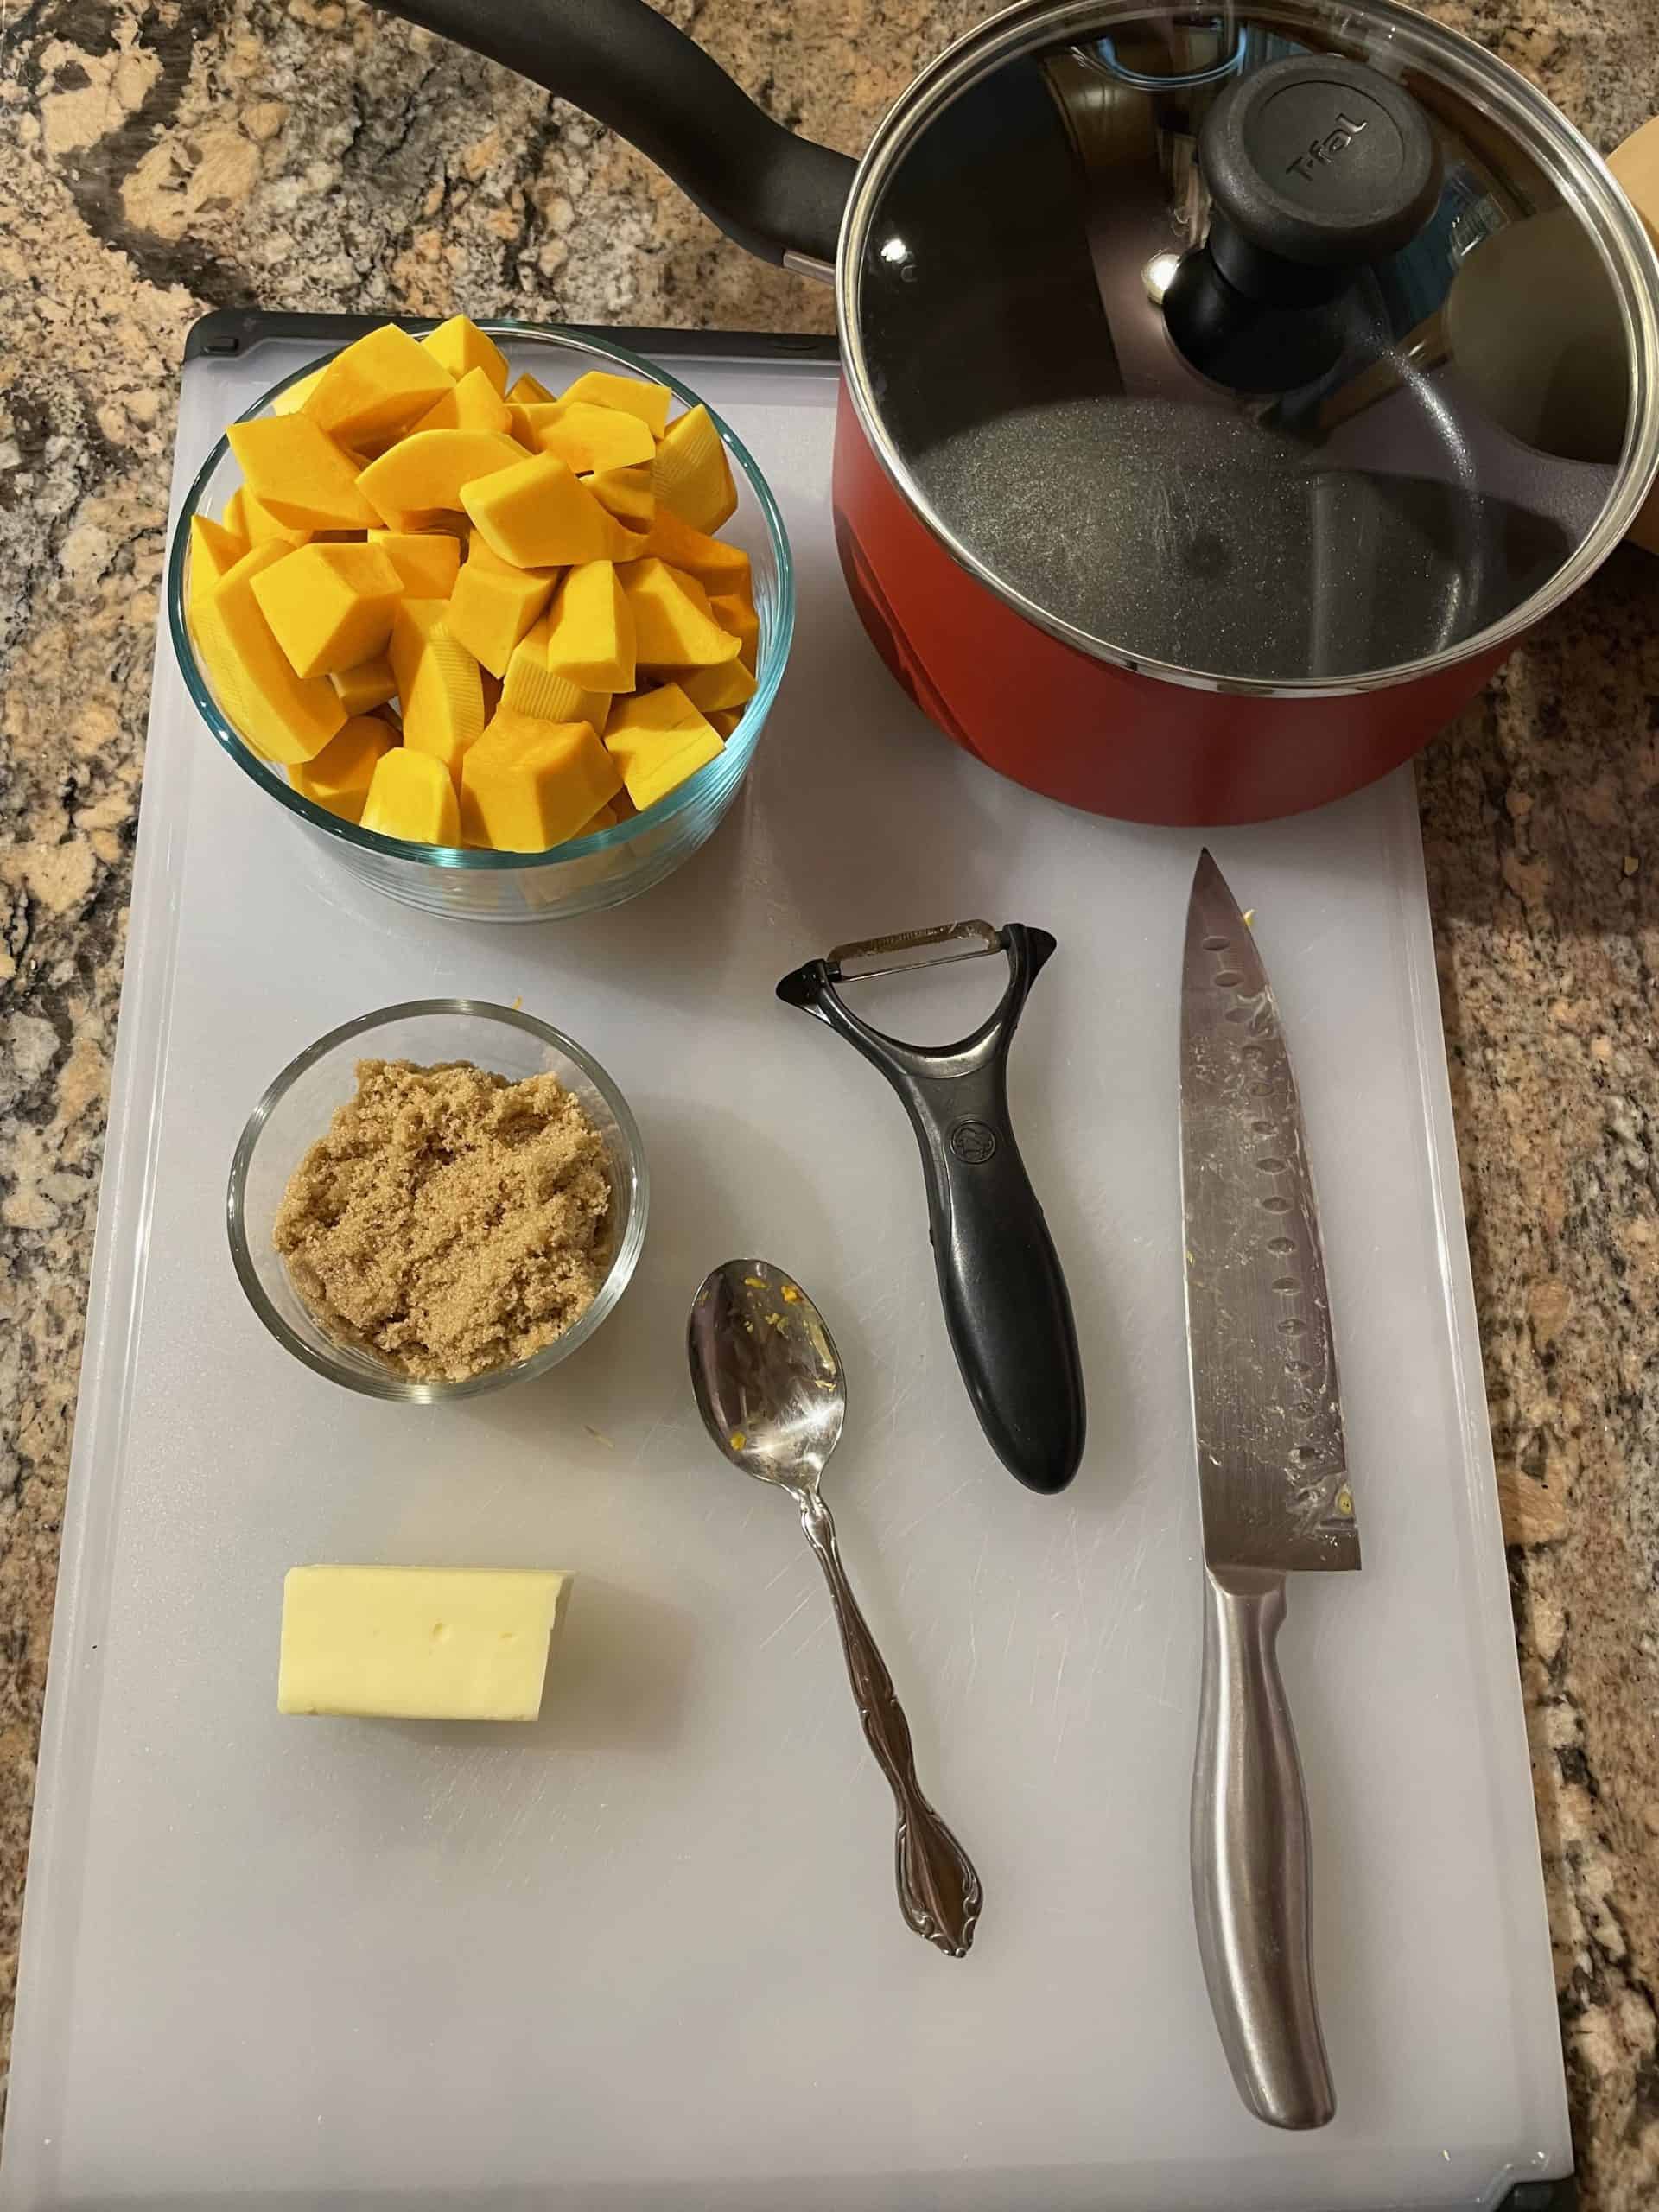 Mashed Butternut Squash ingredients - diced squash, brown sugar, butter and tools needed.